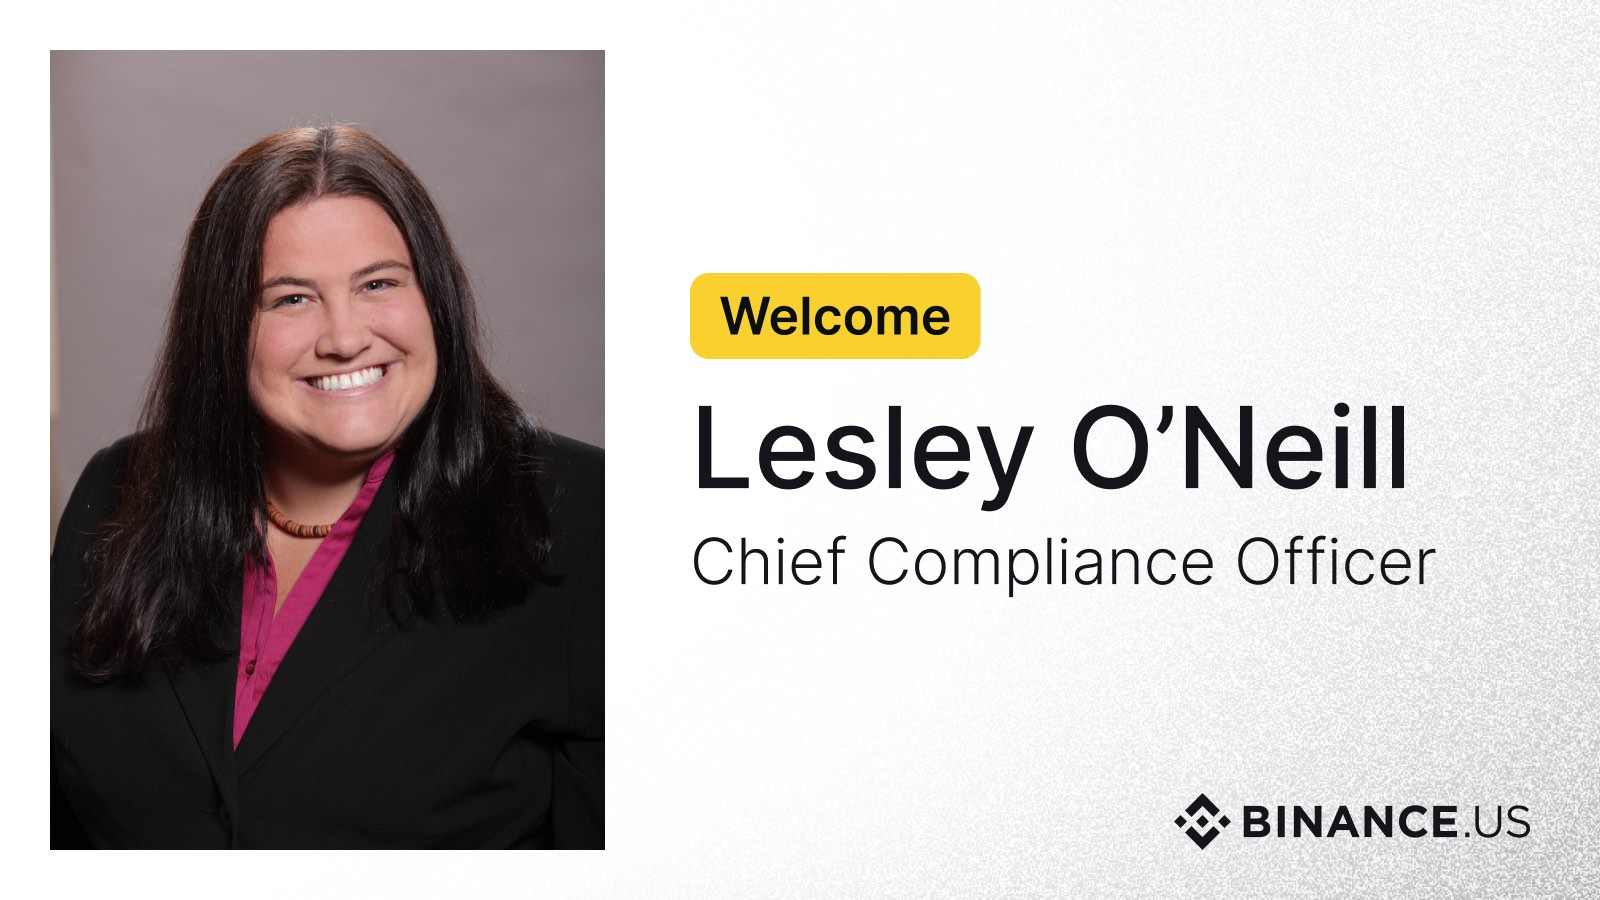 Lesley O’Neill Joins Binance.US as Chief Compliance Officer